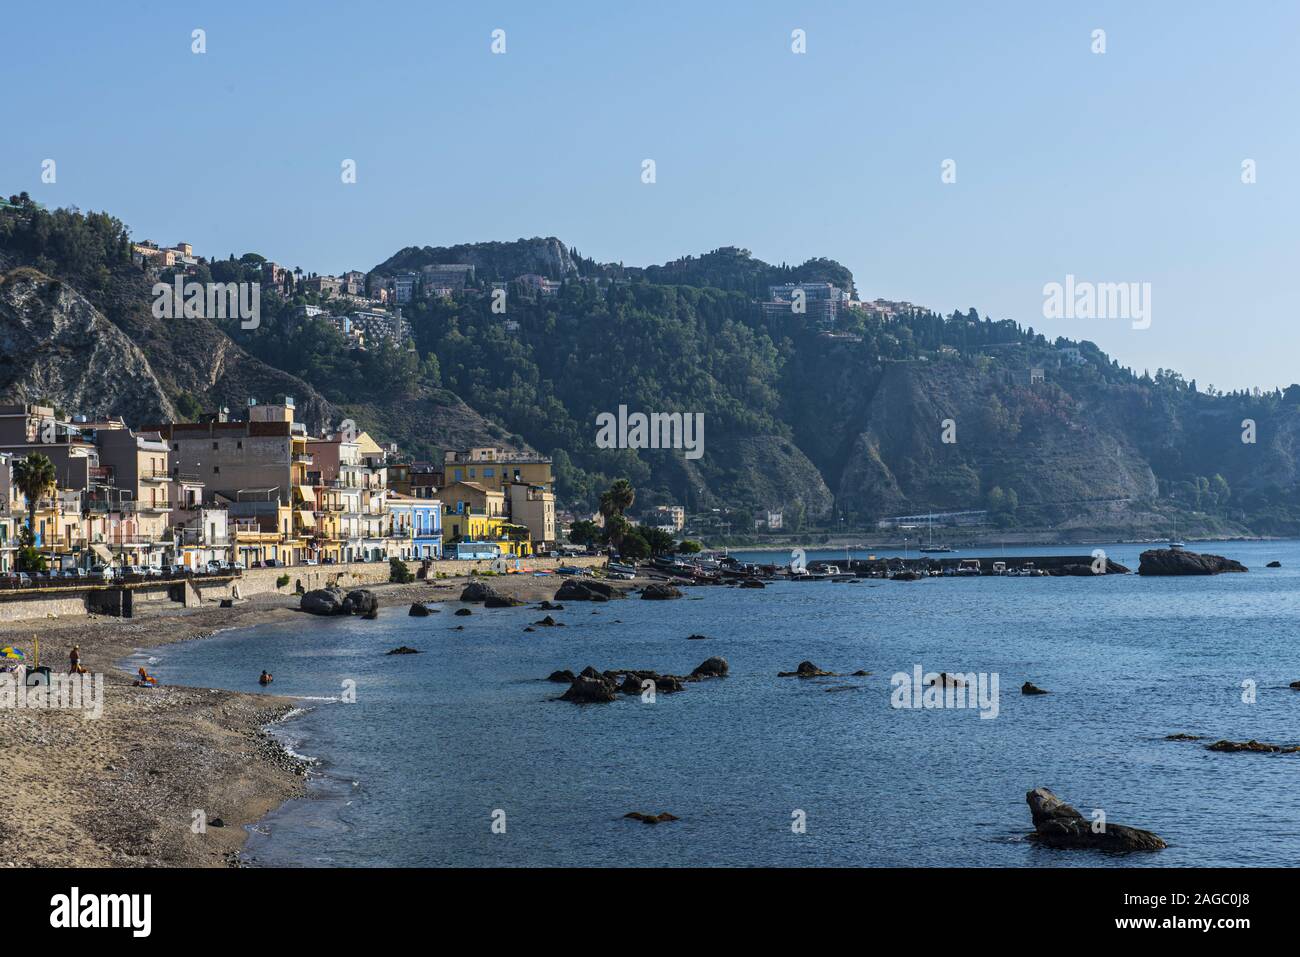 View of Taormina from Naxos with buildings, sea, boats and blue sky Stock Photo